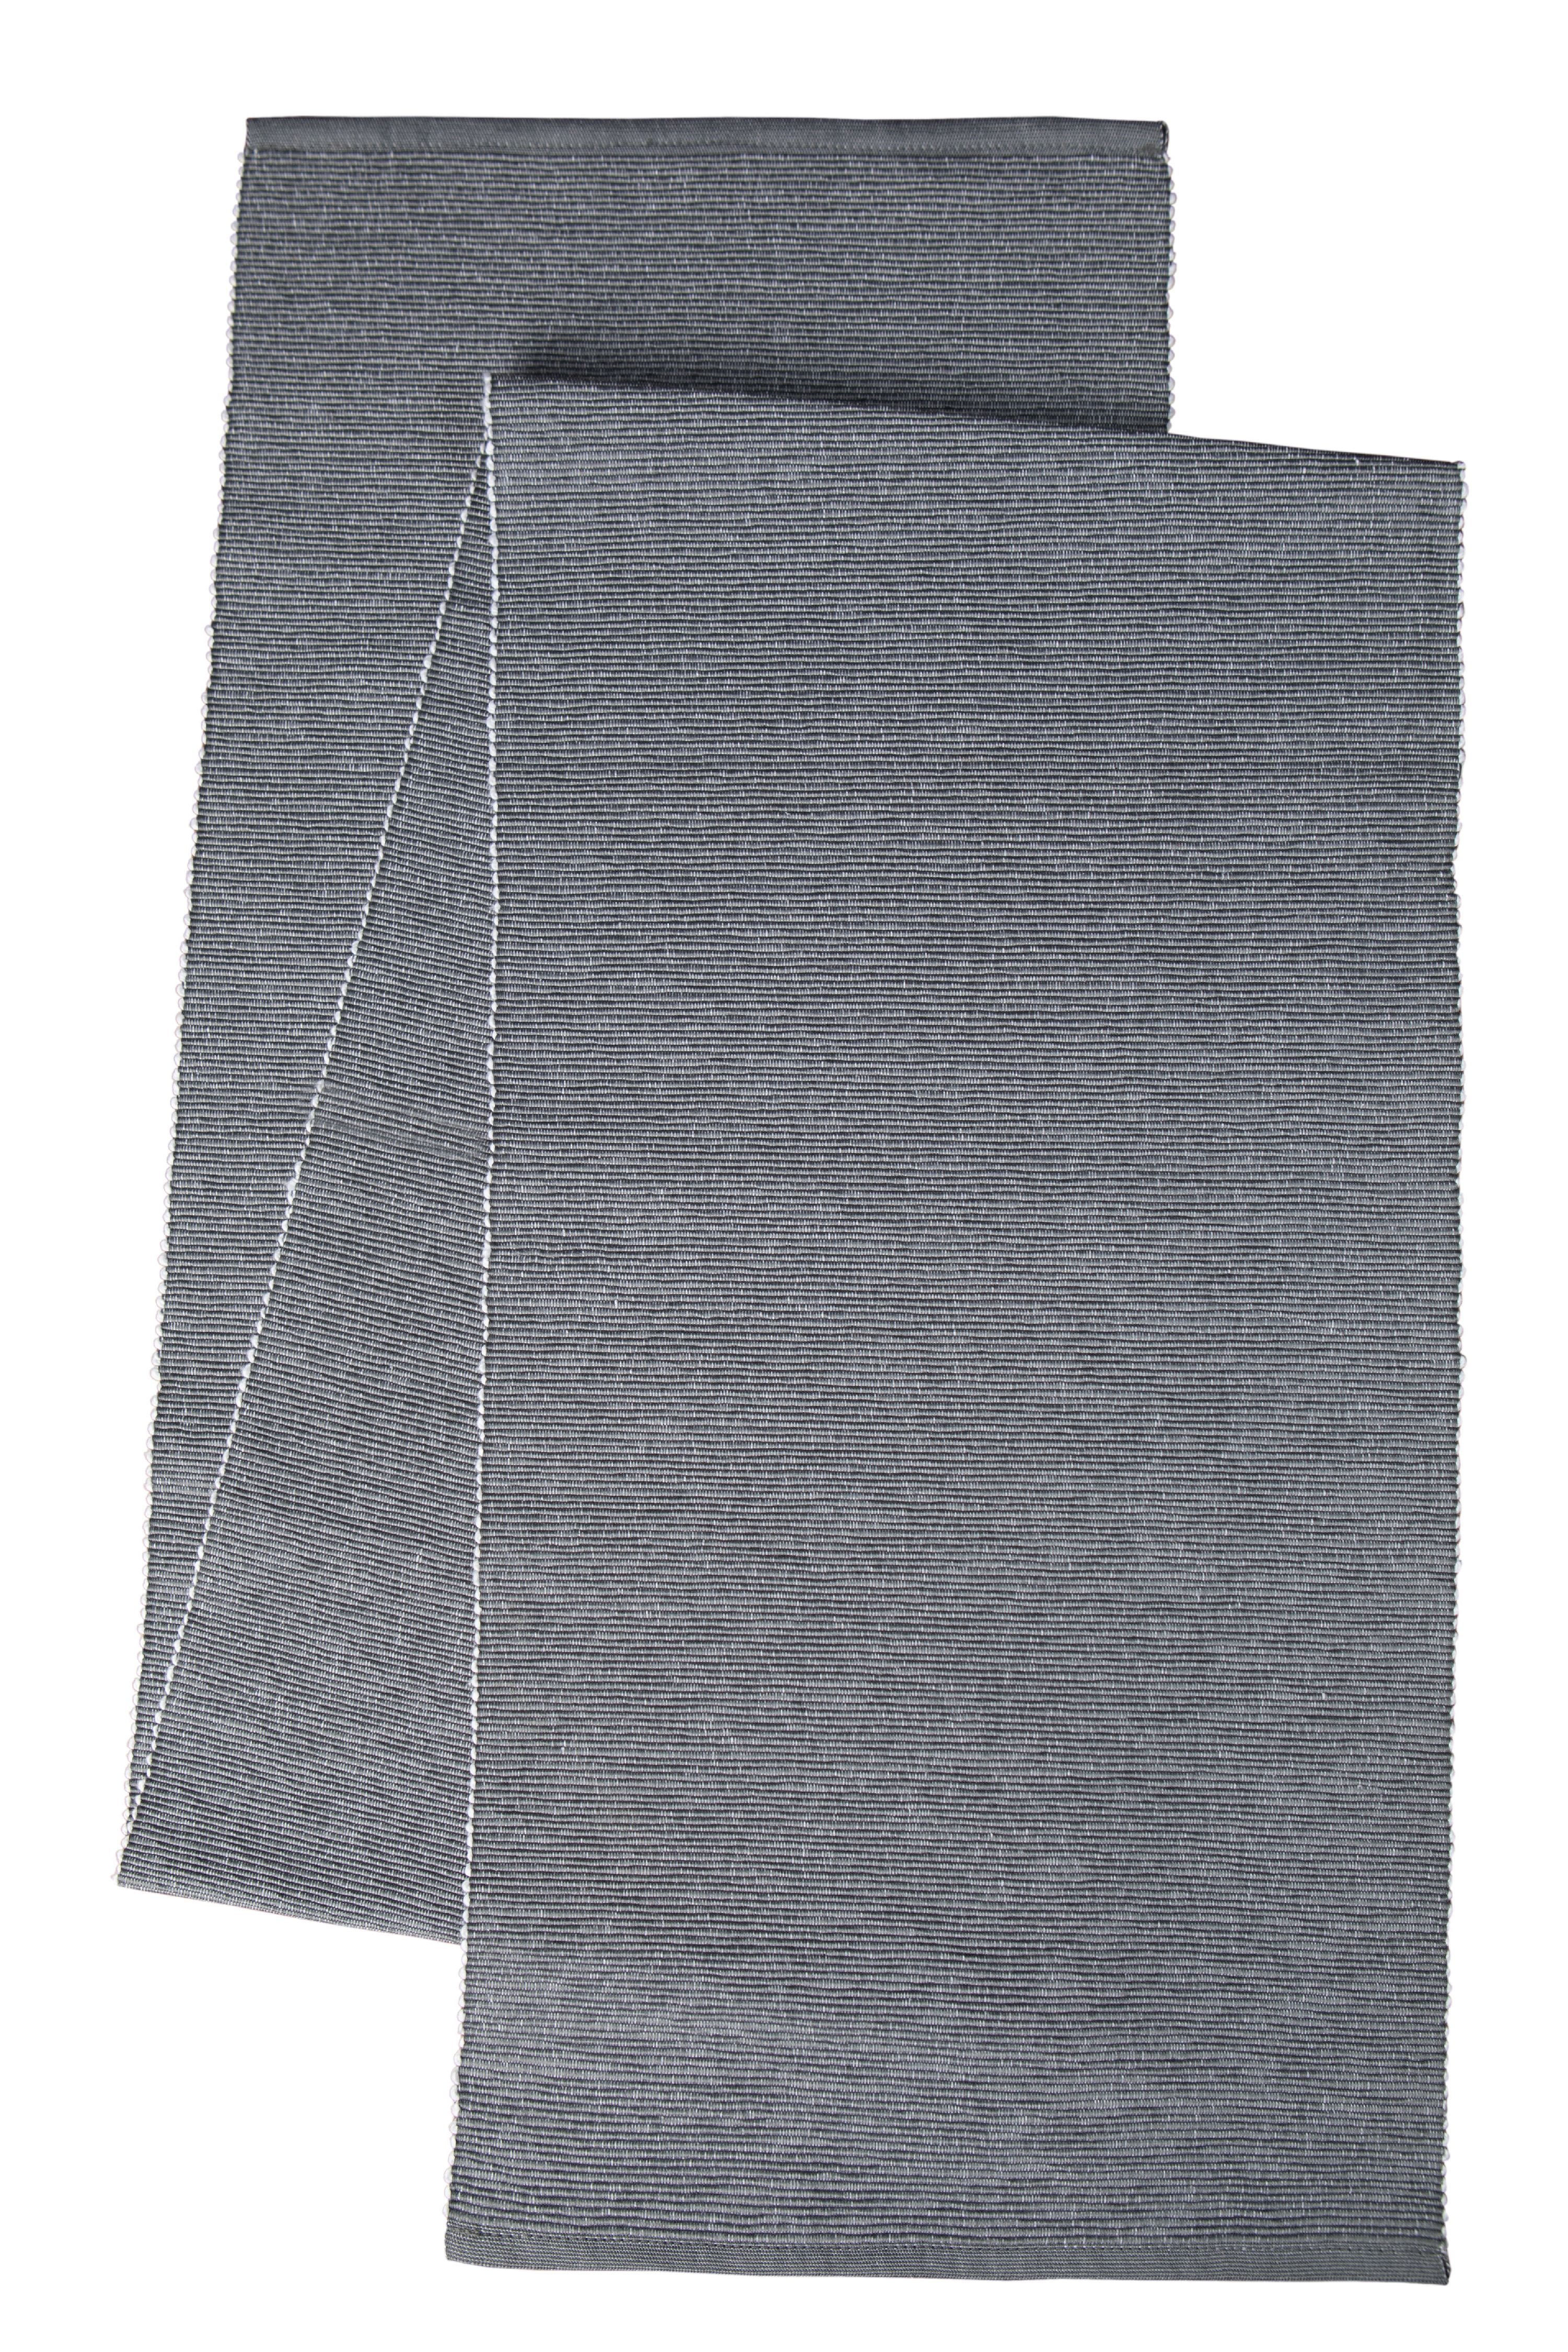 Mainstays Ribbed Chambray Table Runner, 13 in x 72 in, Cotton Polyester Blend, Gray, 1 Piece | Walmart (US)